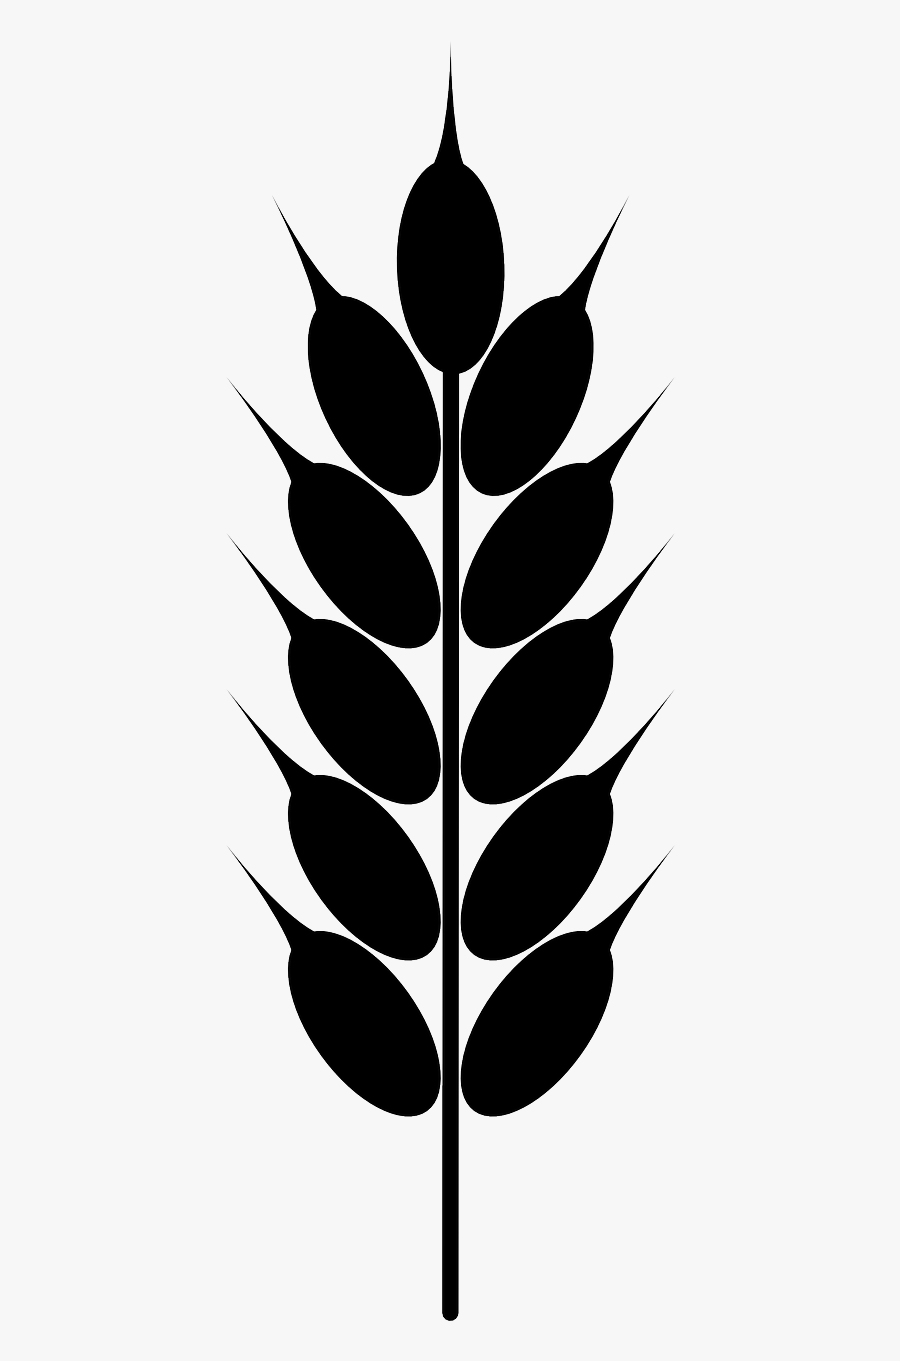 Clip Art Wheat - Wheat Png Black And White, Transparent Clipart